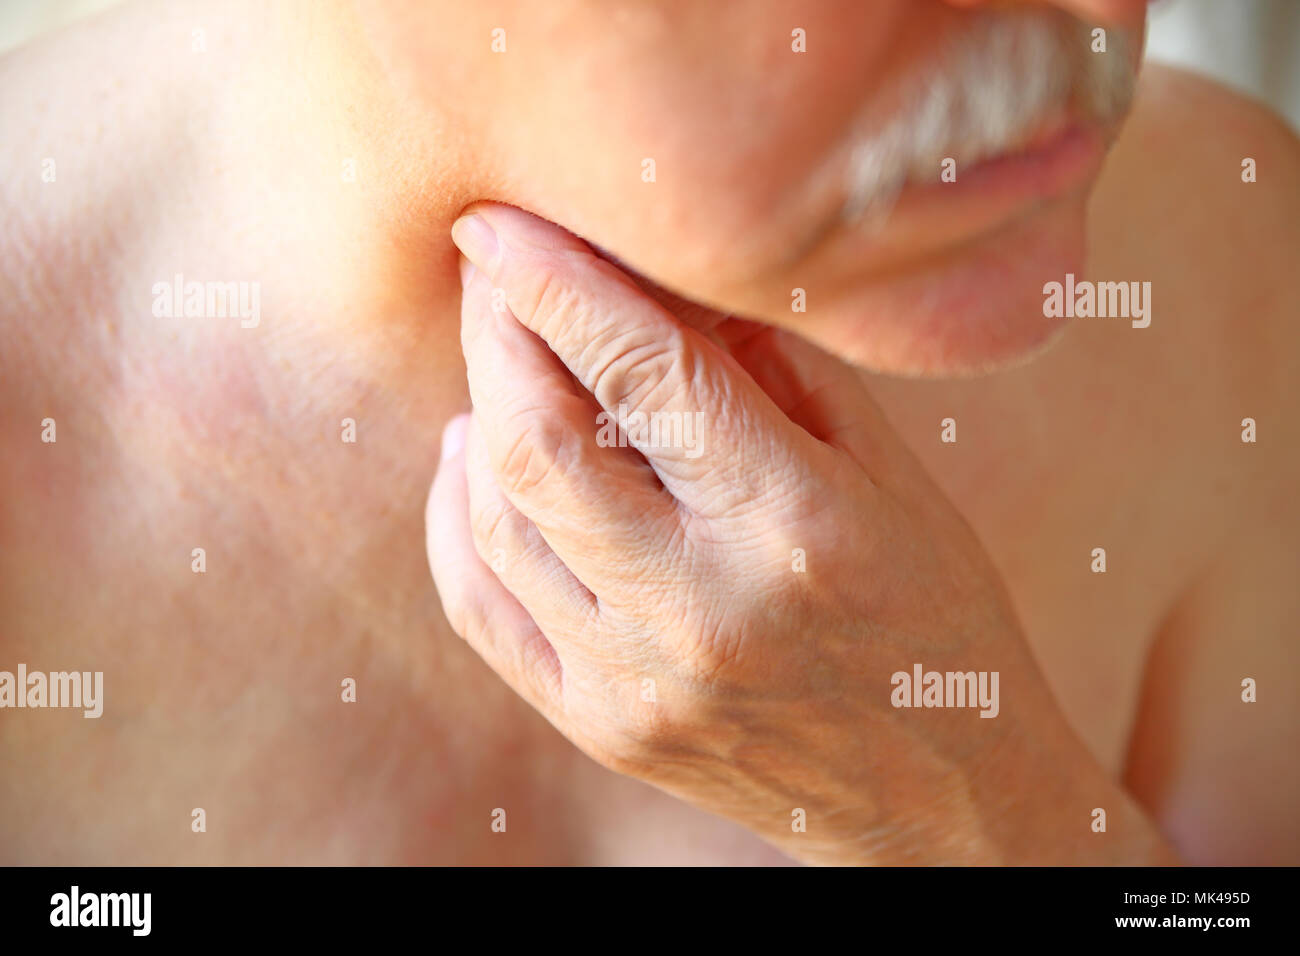 An older man touches his painful throat with his fingers Stock Photo